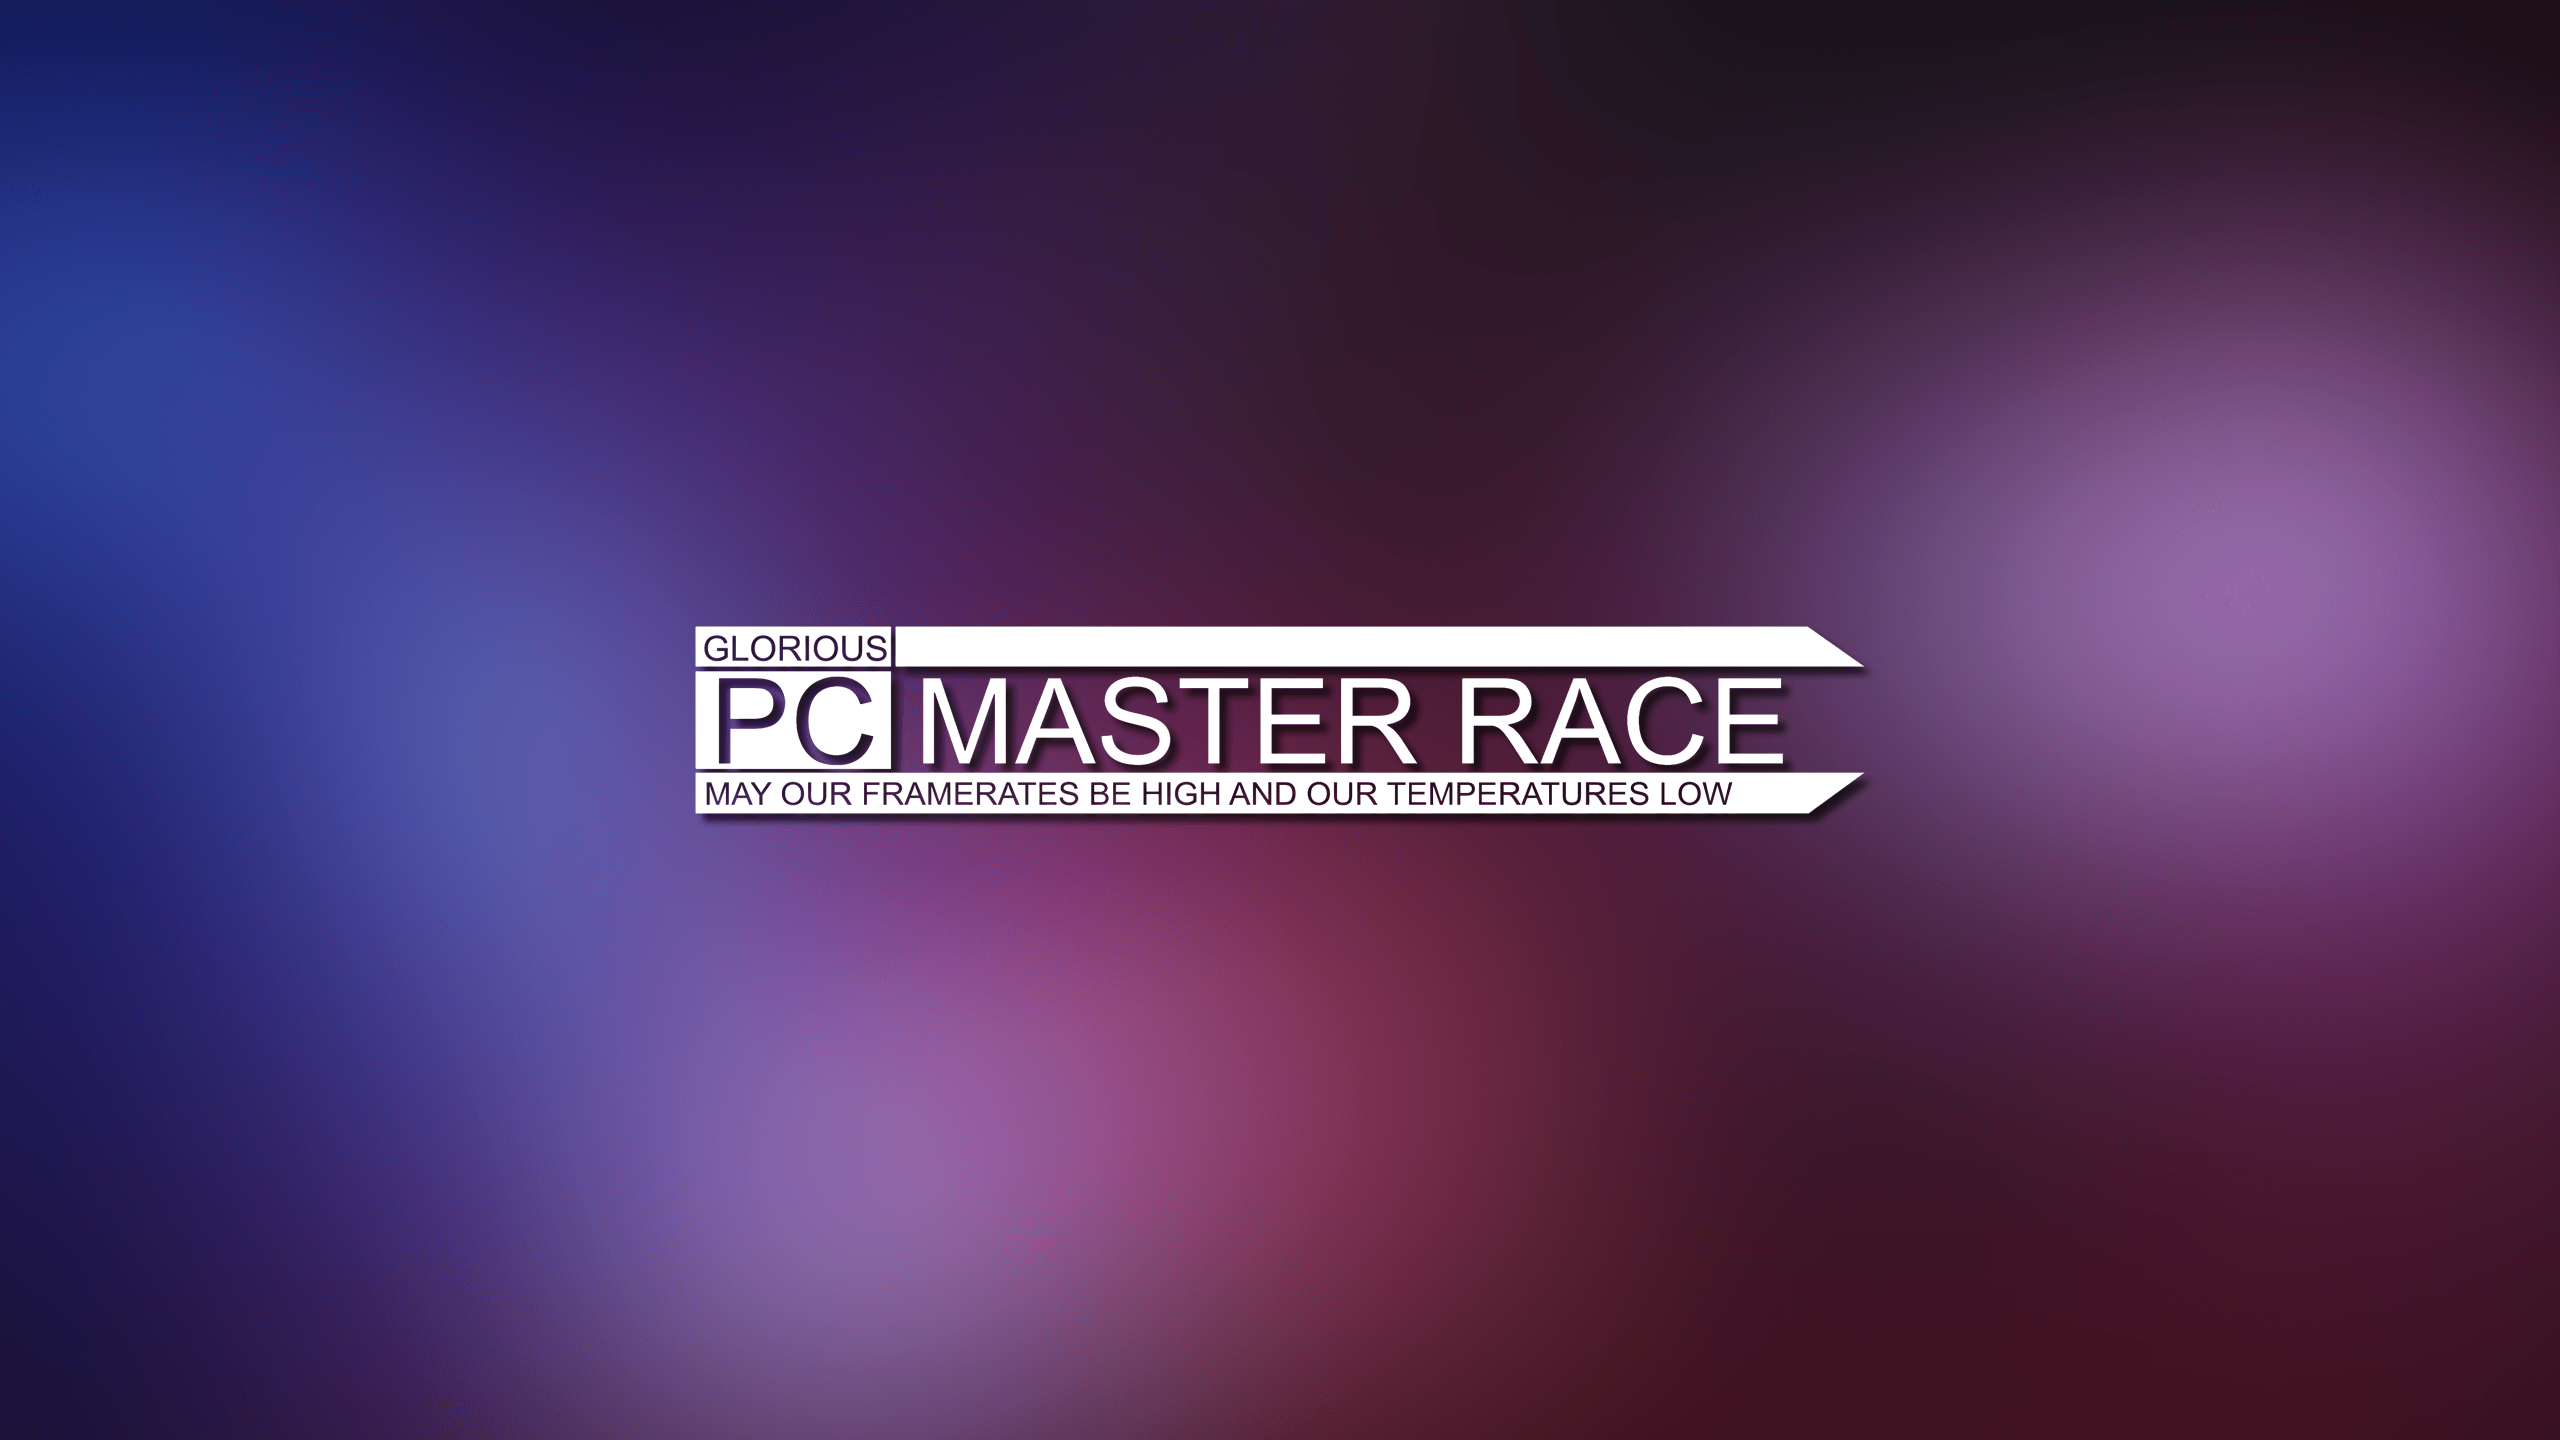 Glorious Pc Gaming Race Wallpapers